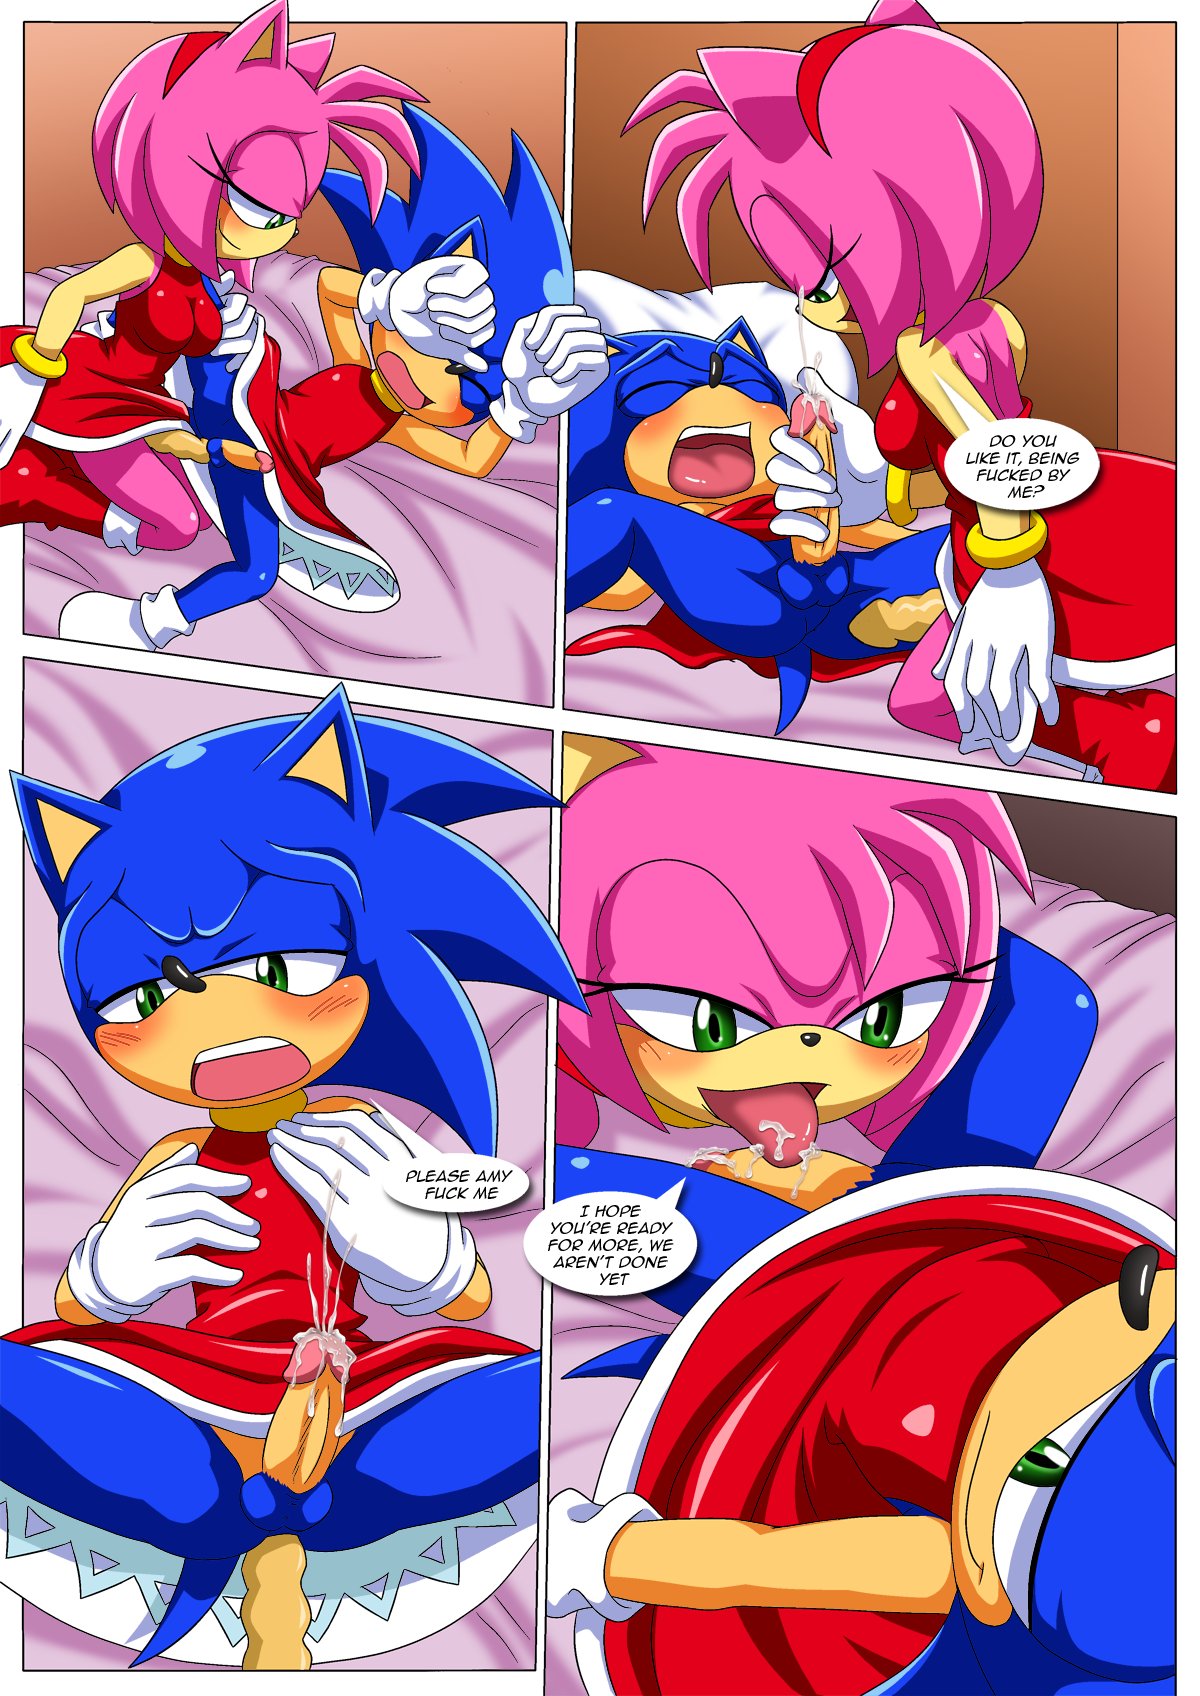 Amy Rose Furry Shemale Porn - Sonic X Shemale | Anal Dream House